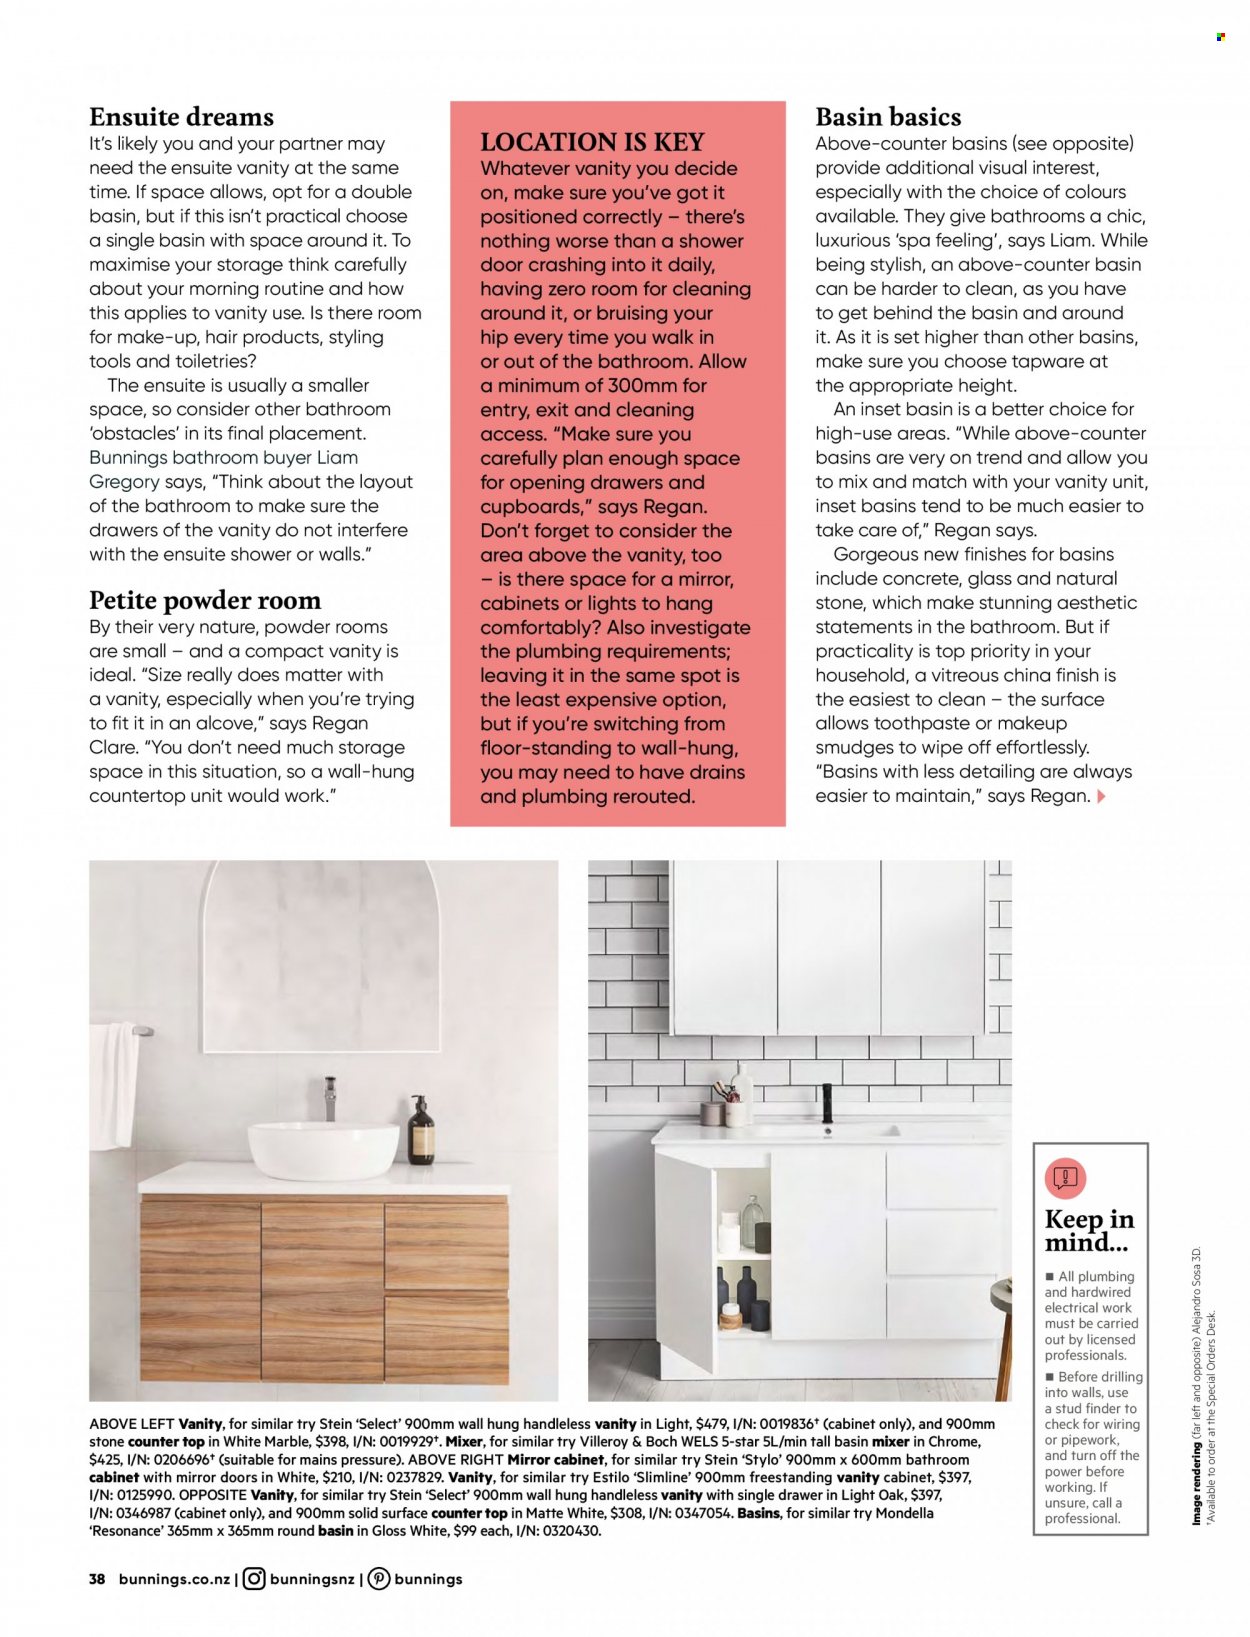 thumbnail - Bunnings Warehouse mailer - Sales products - basin mixer, cabinet, mirror cabinet, vanity, desk, mirror. Page 38.